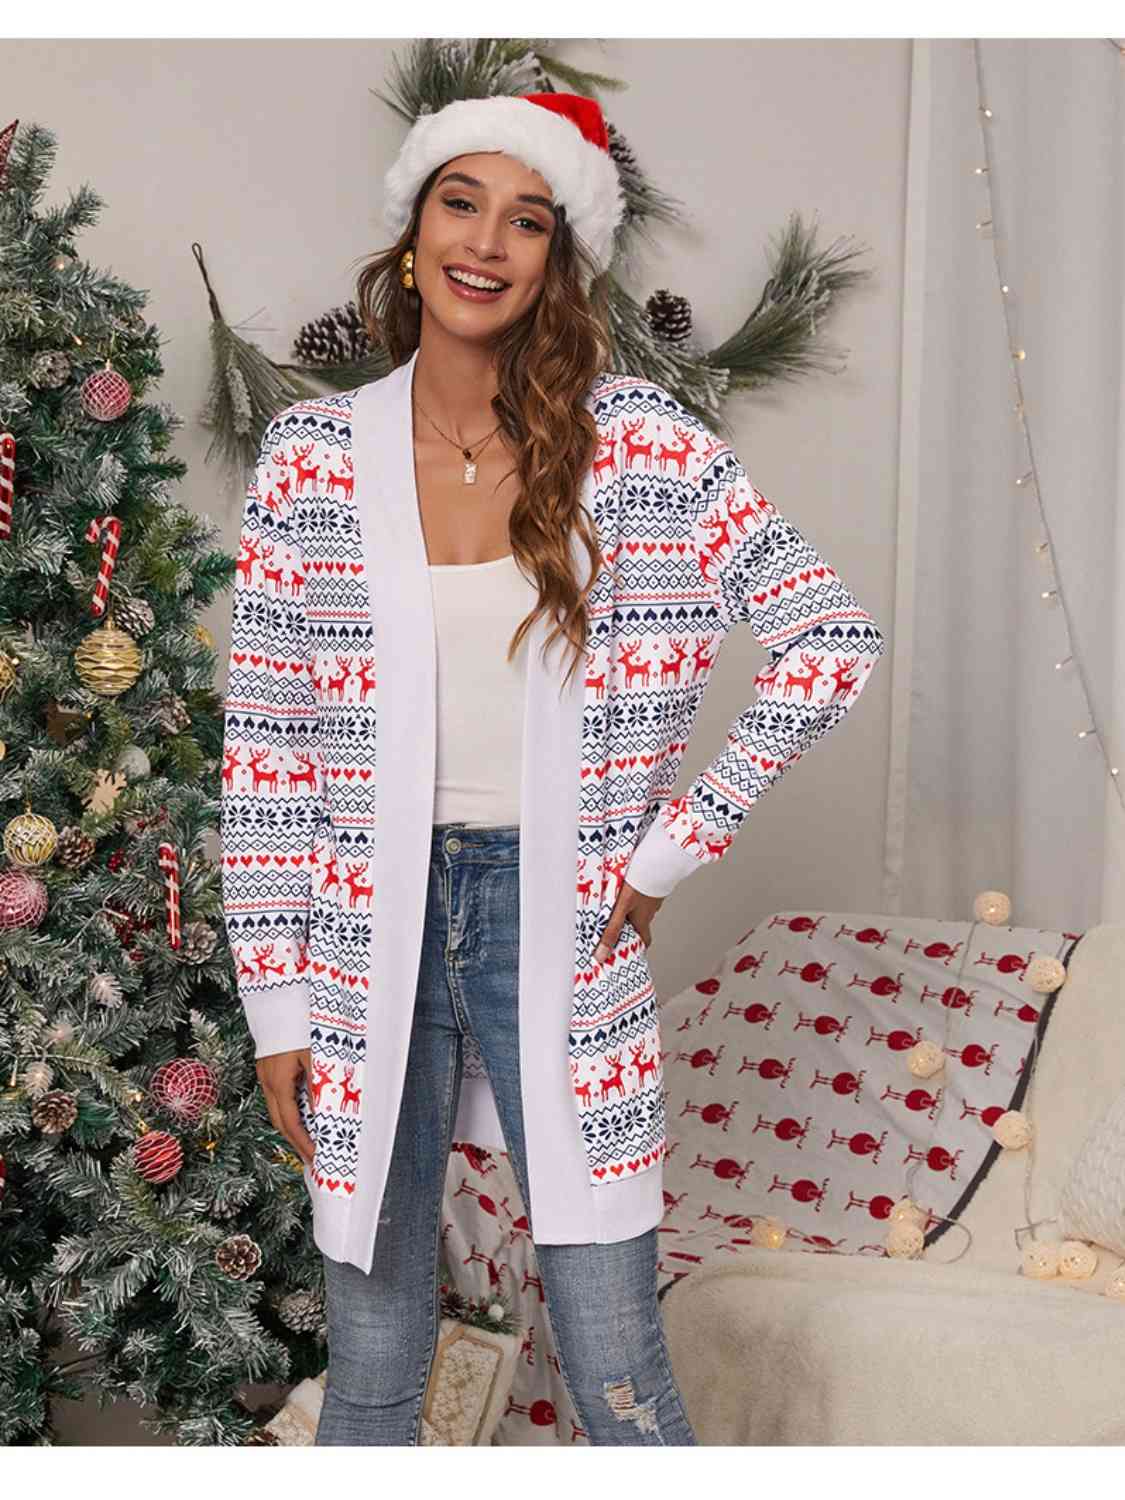 Christmas Open Front Cardigan - Kawaii Stop - Christmas, Christmas Cardigan, Classic Style, Cozy Comfort, Festive Apparel, Holiday Fashion, Holiday Outfit, N@X, Open Front Sweater, Seasonal Wardrobe, Ship From Overseas, Stylish Outerwear, Winter Warmth